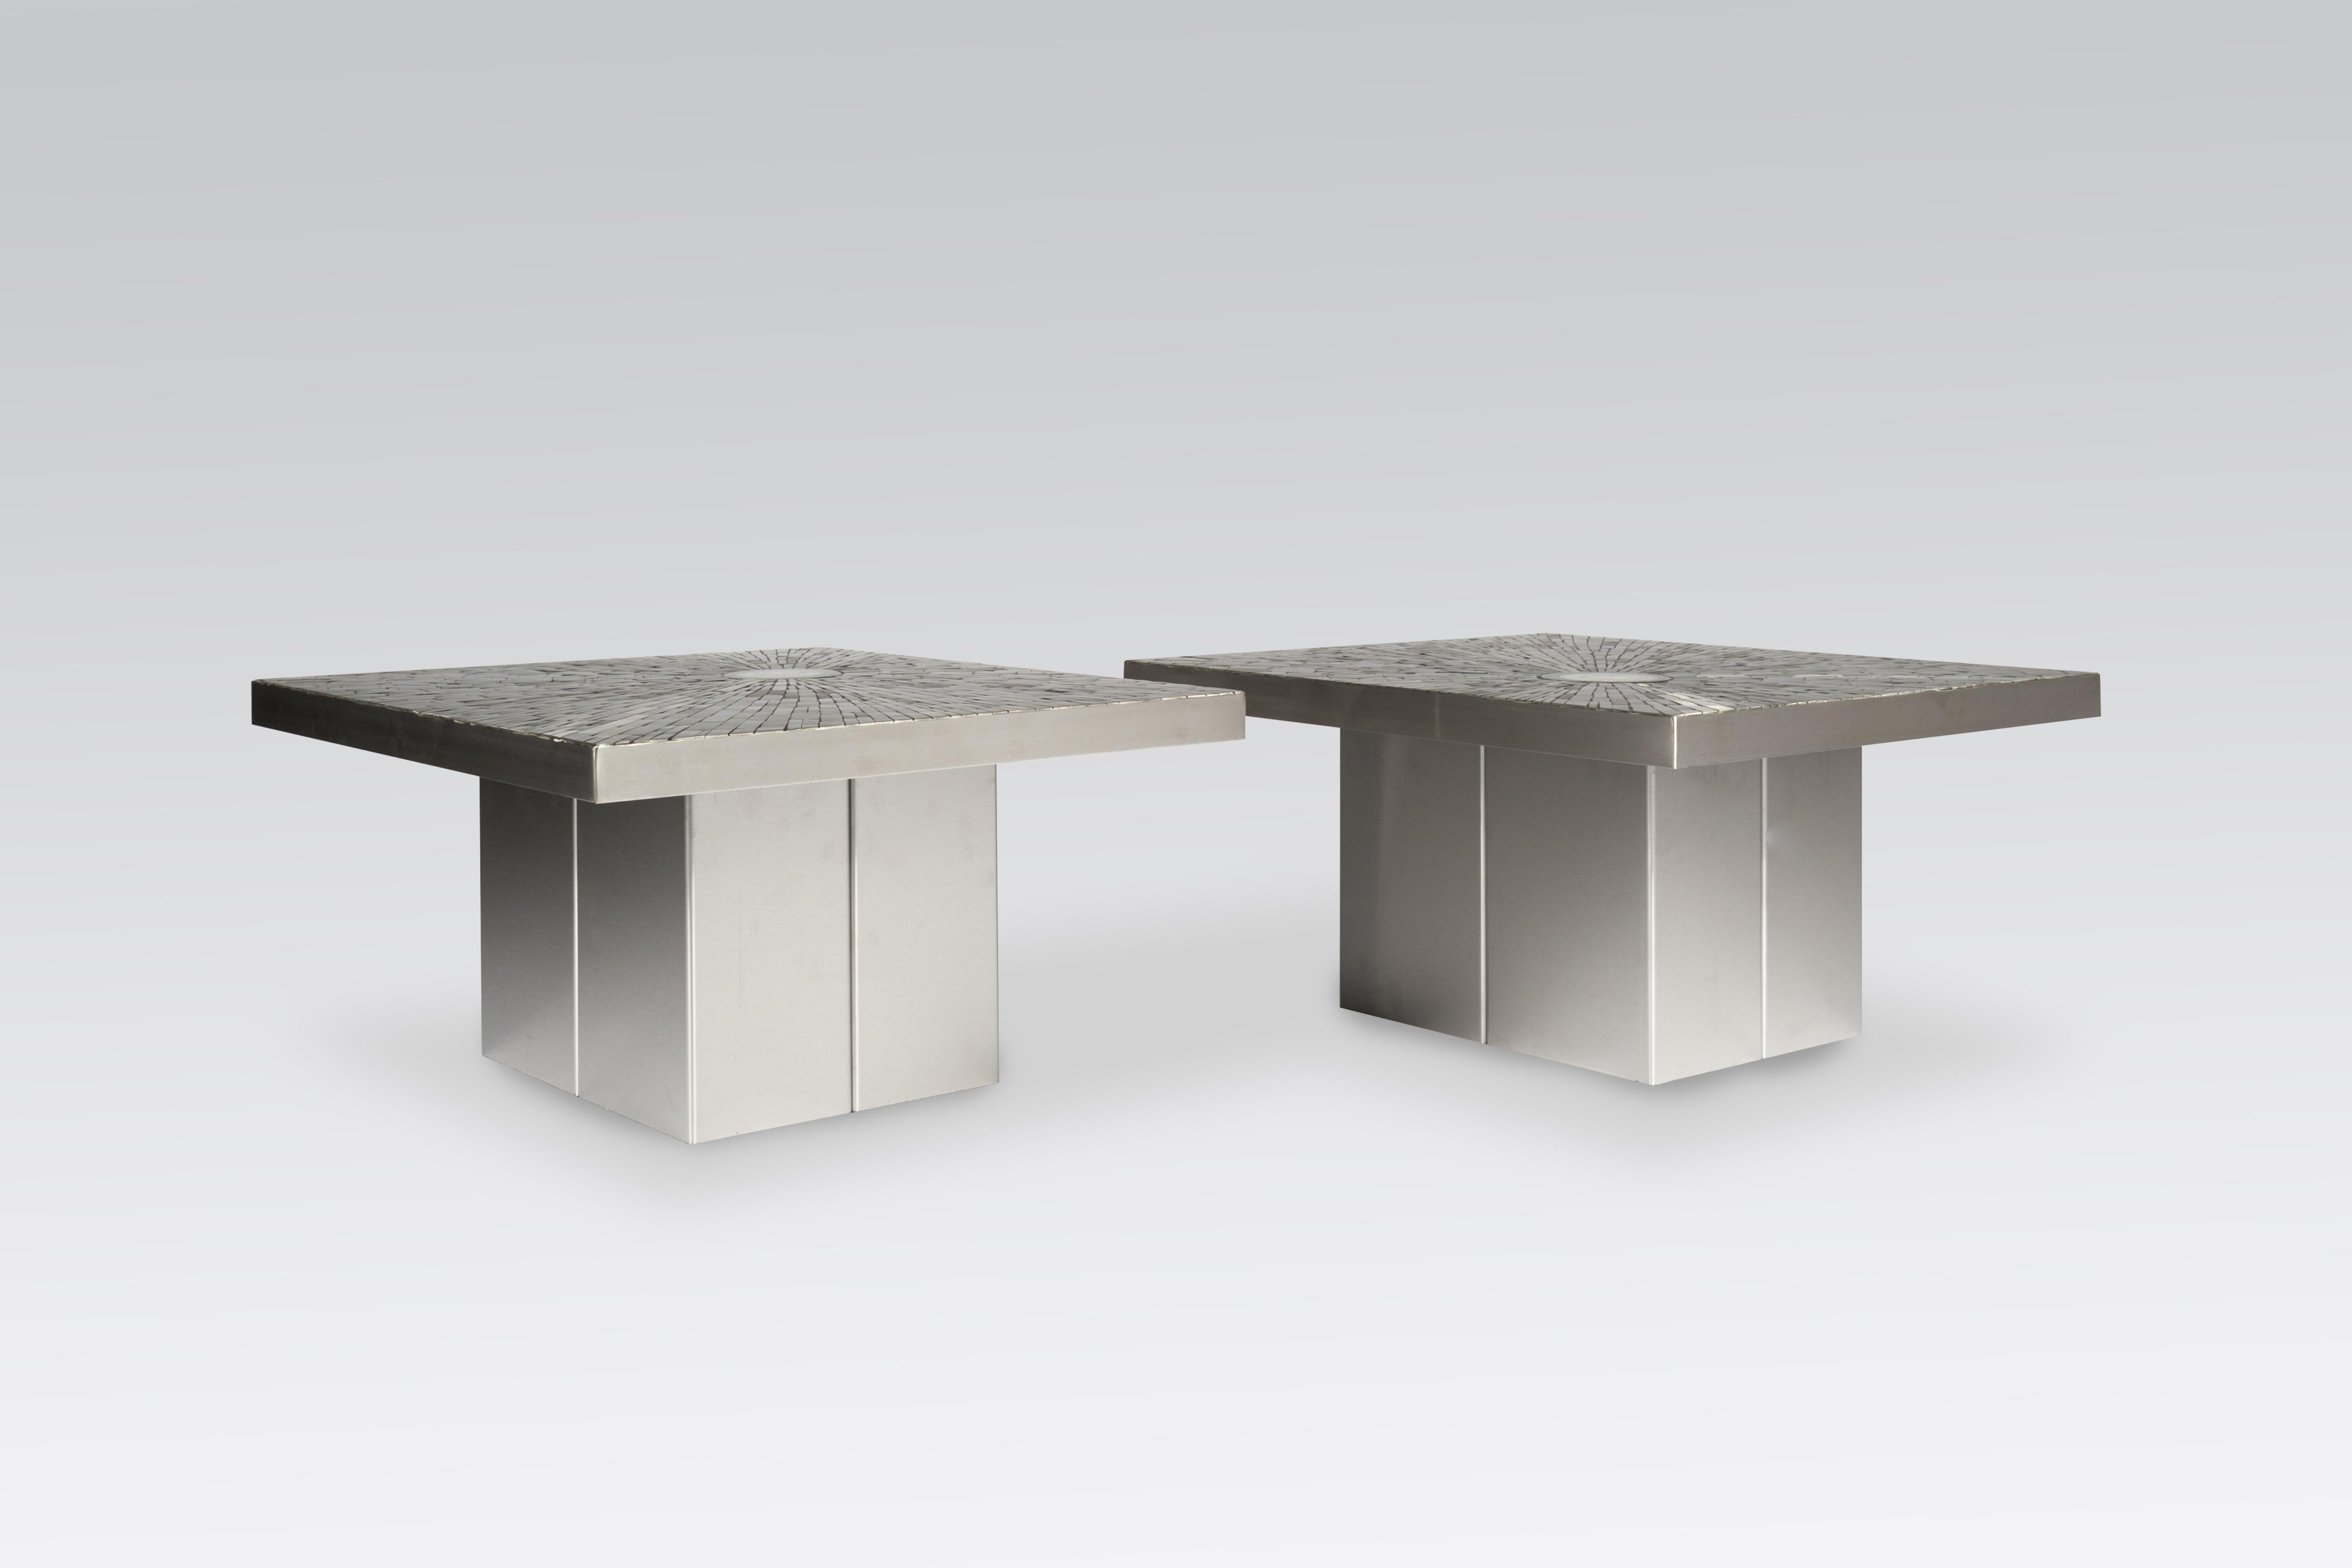 Pair of Side Table in Stainless Steel Mosaic Inlay Agates by Stan Usel 1